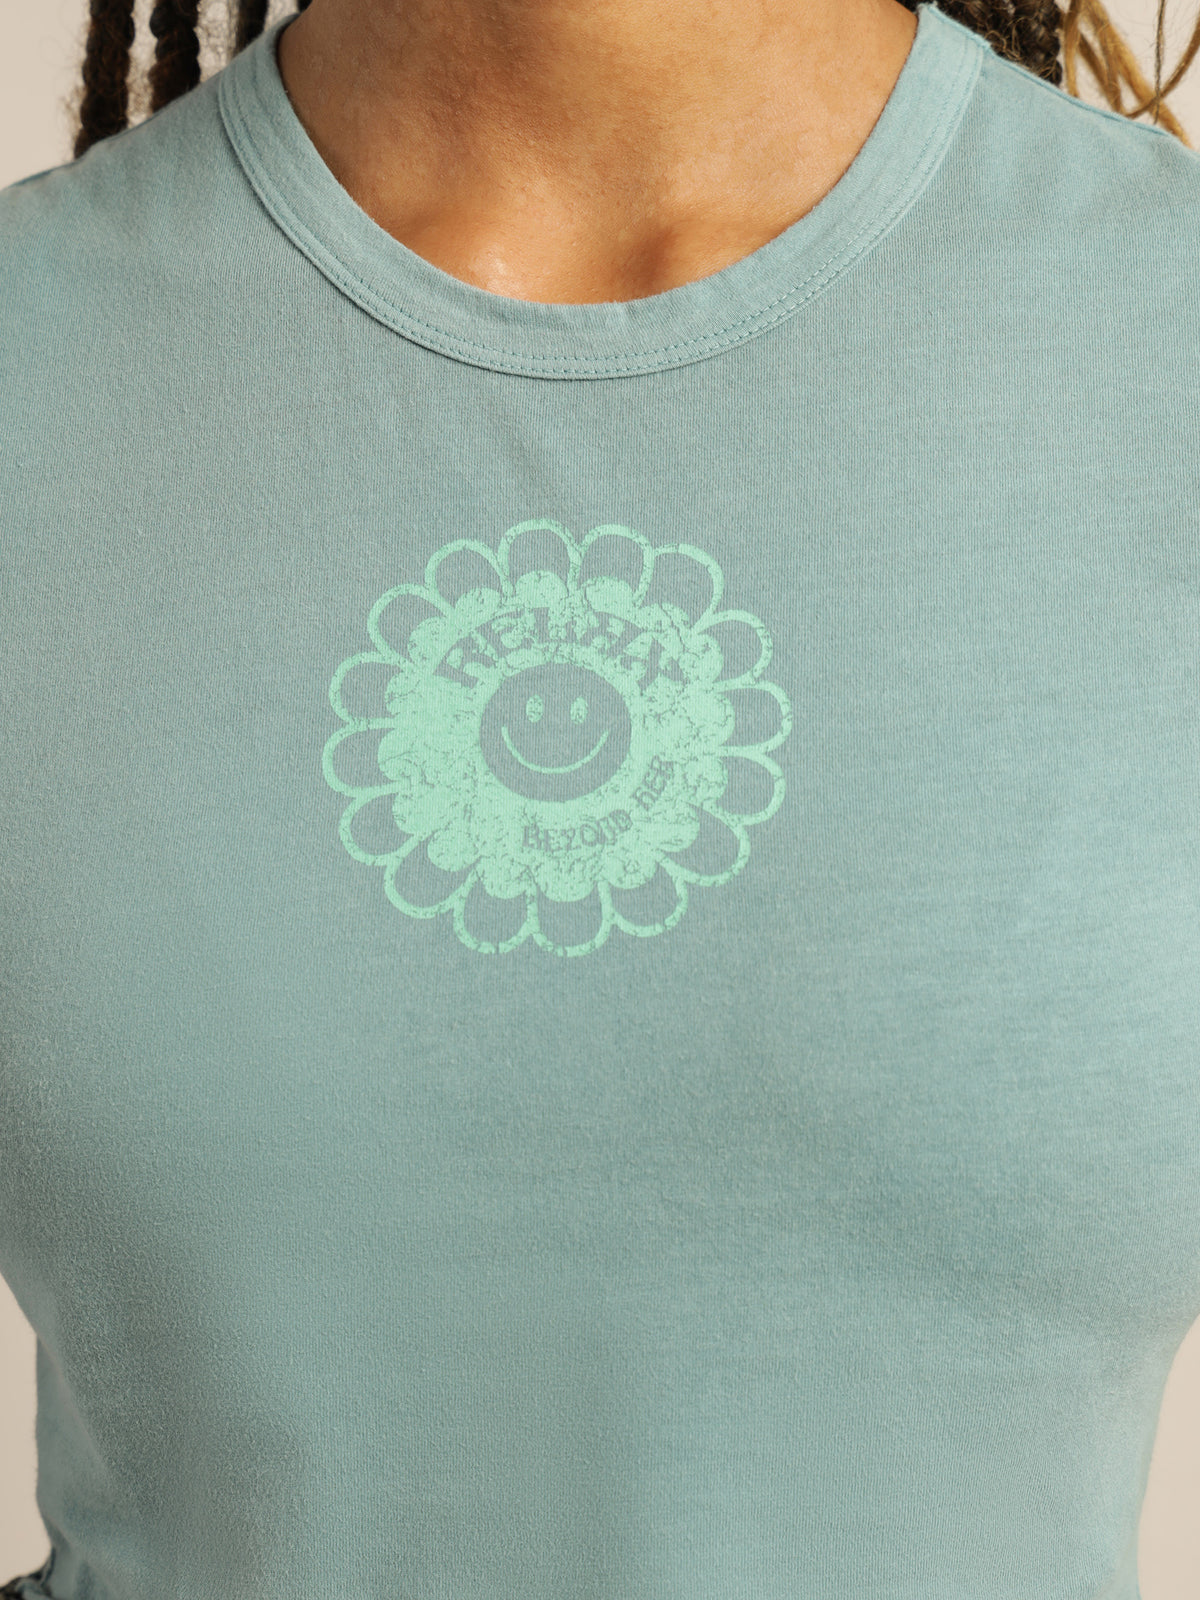 Relax Baby T-Shirt in Teal